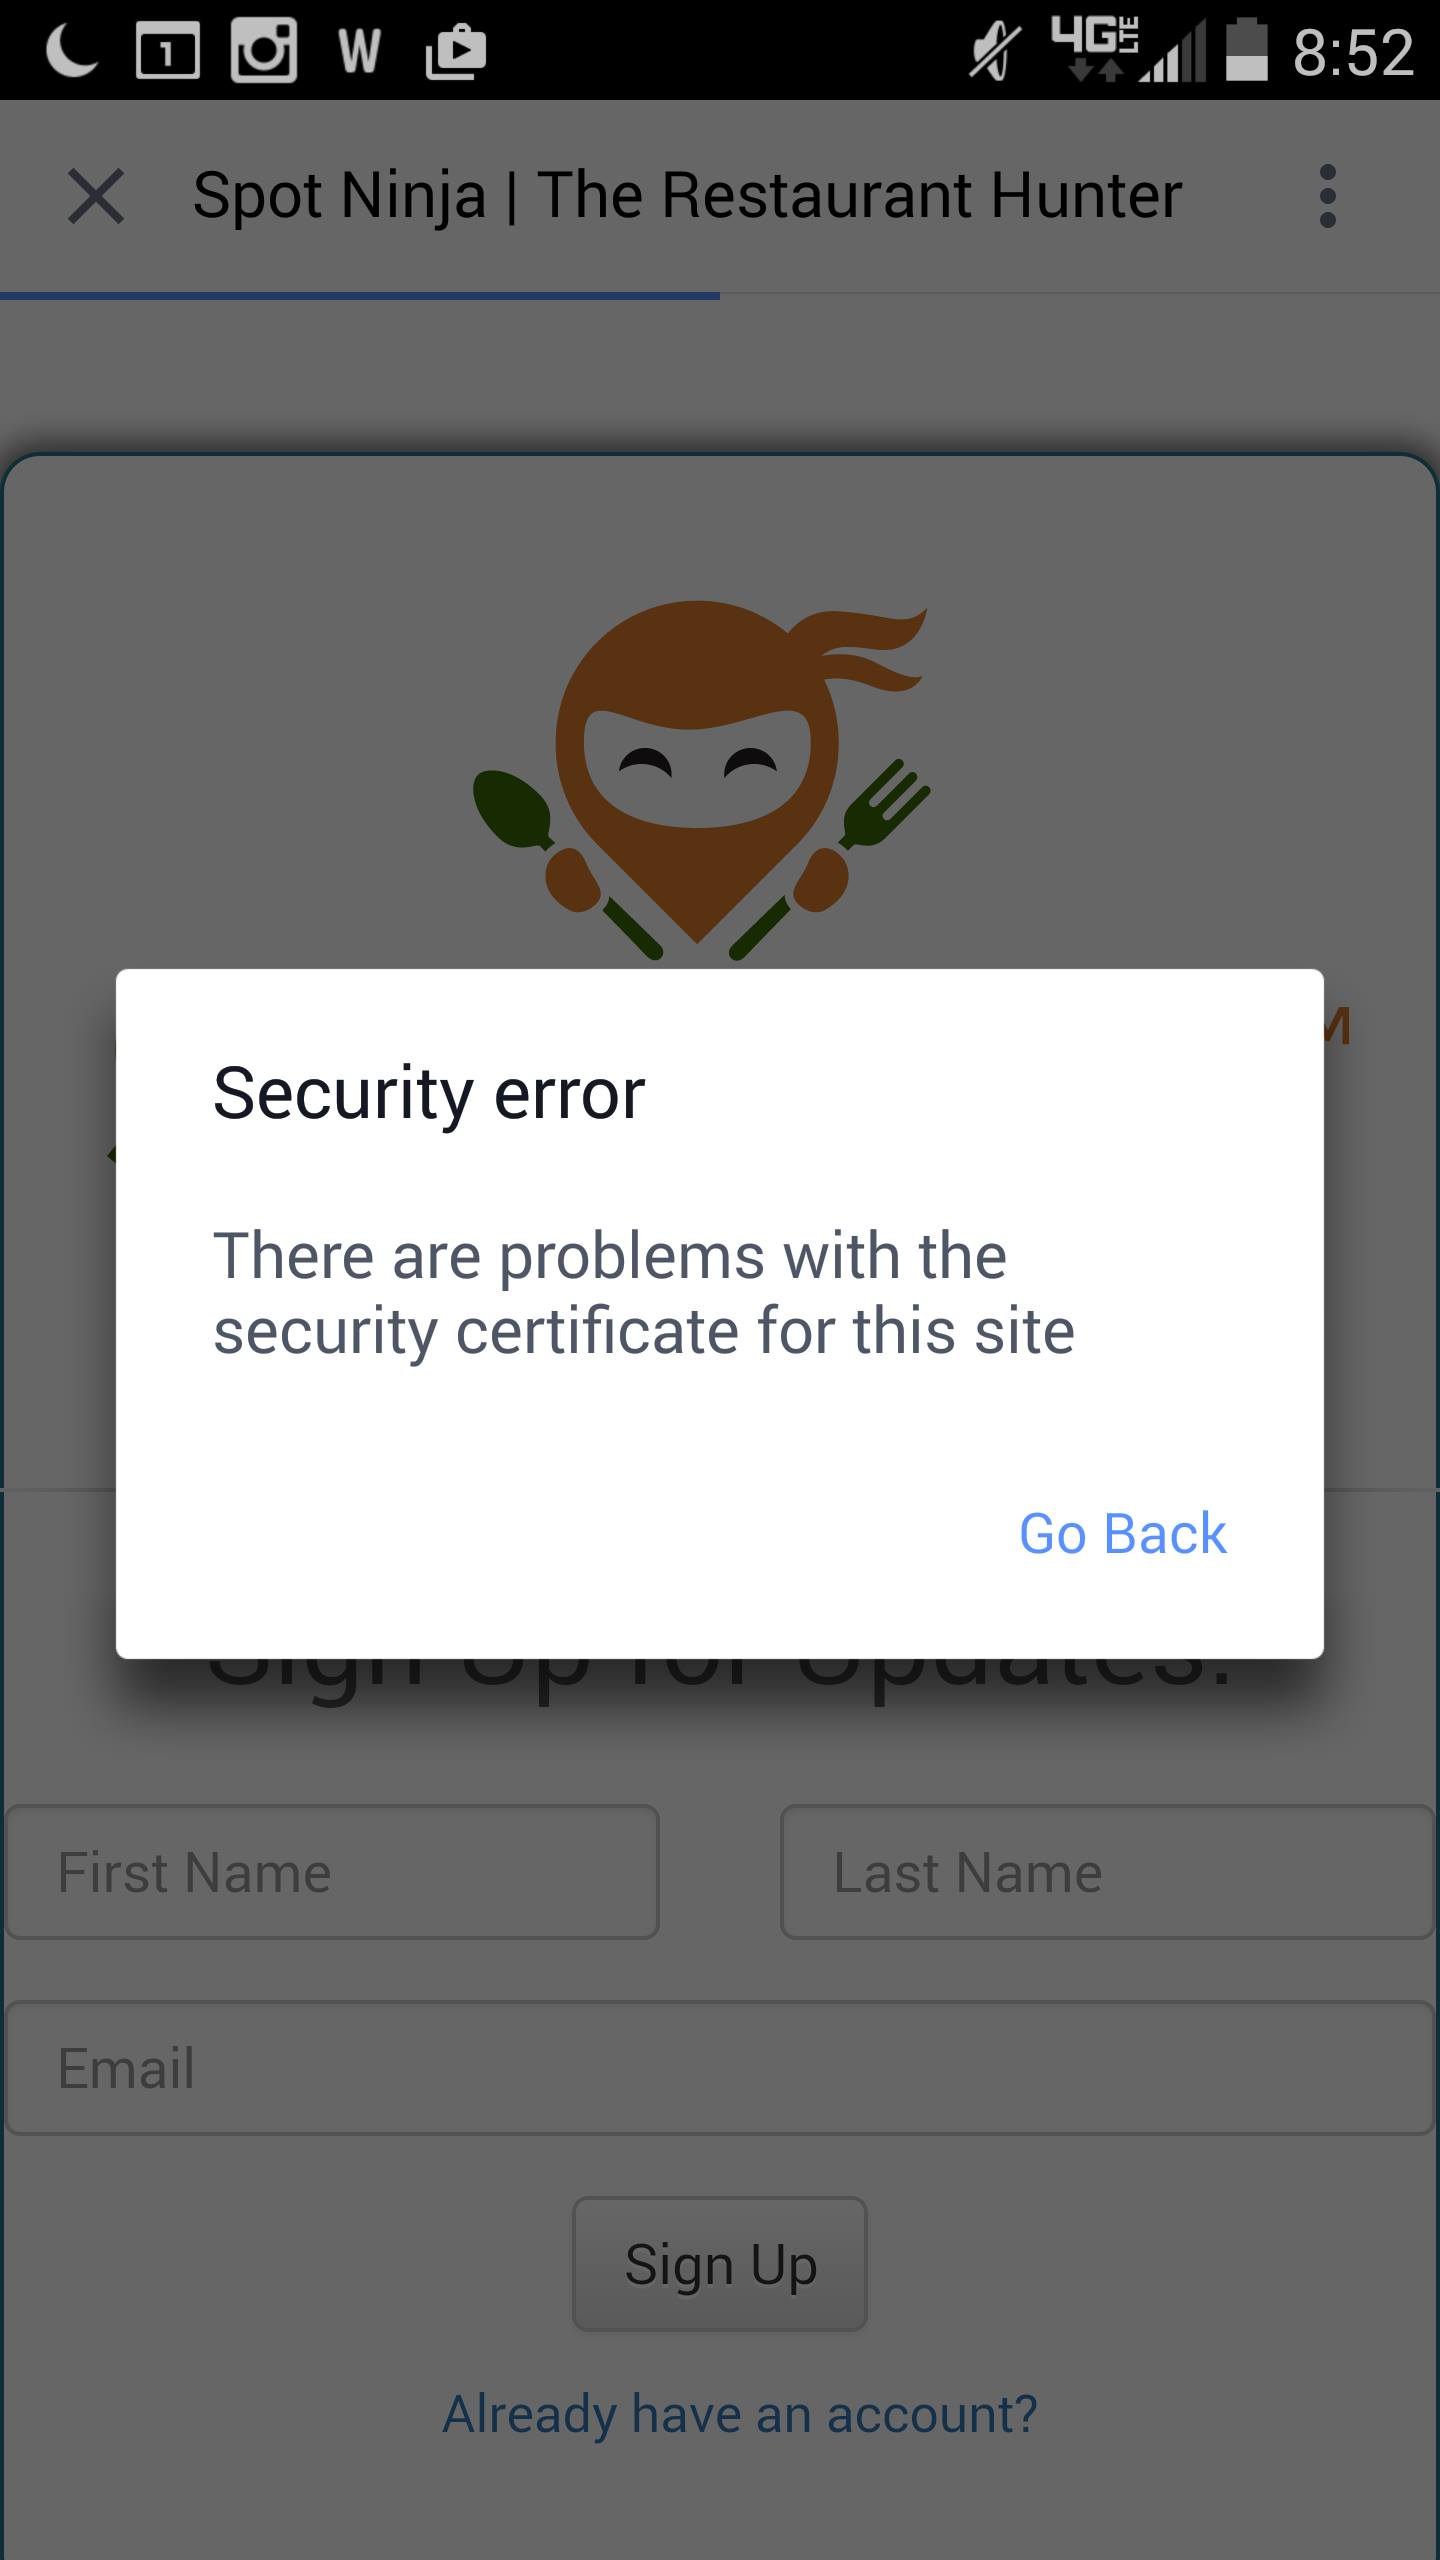 Security error when you go to HTTP website from Facebook in-app browser